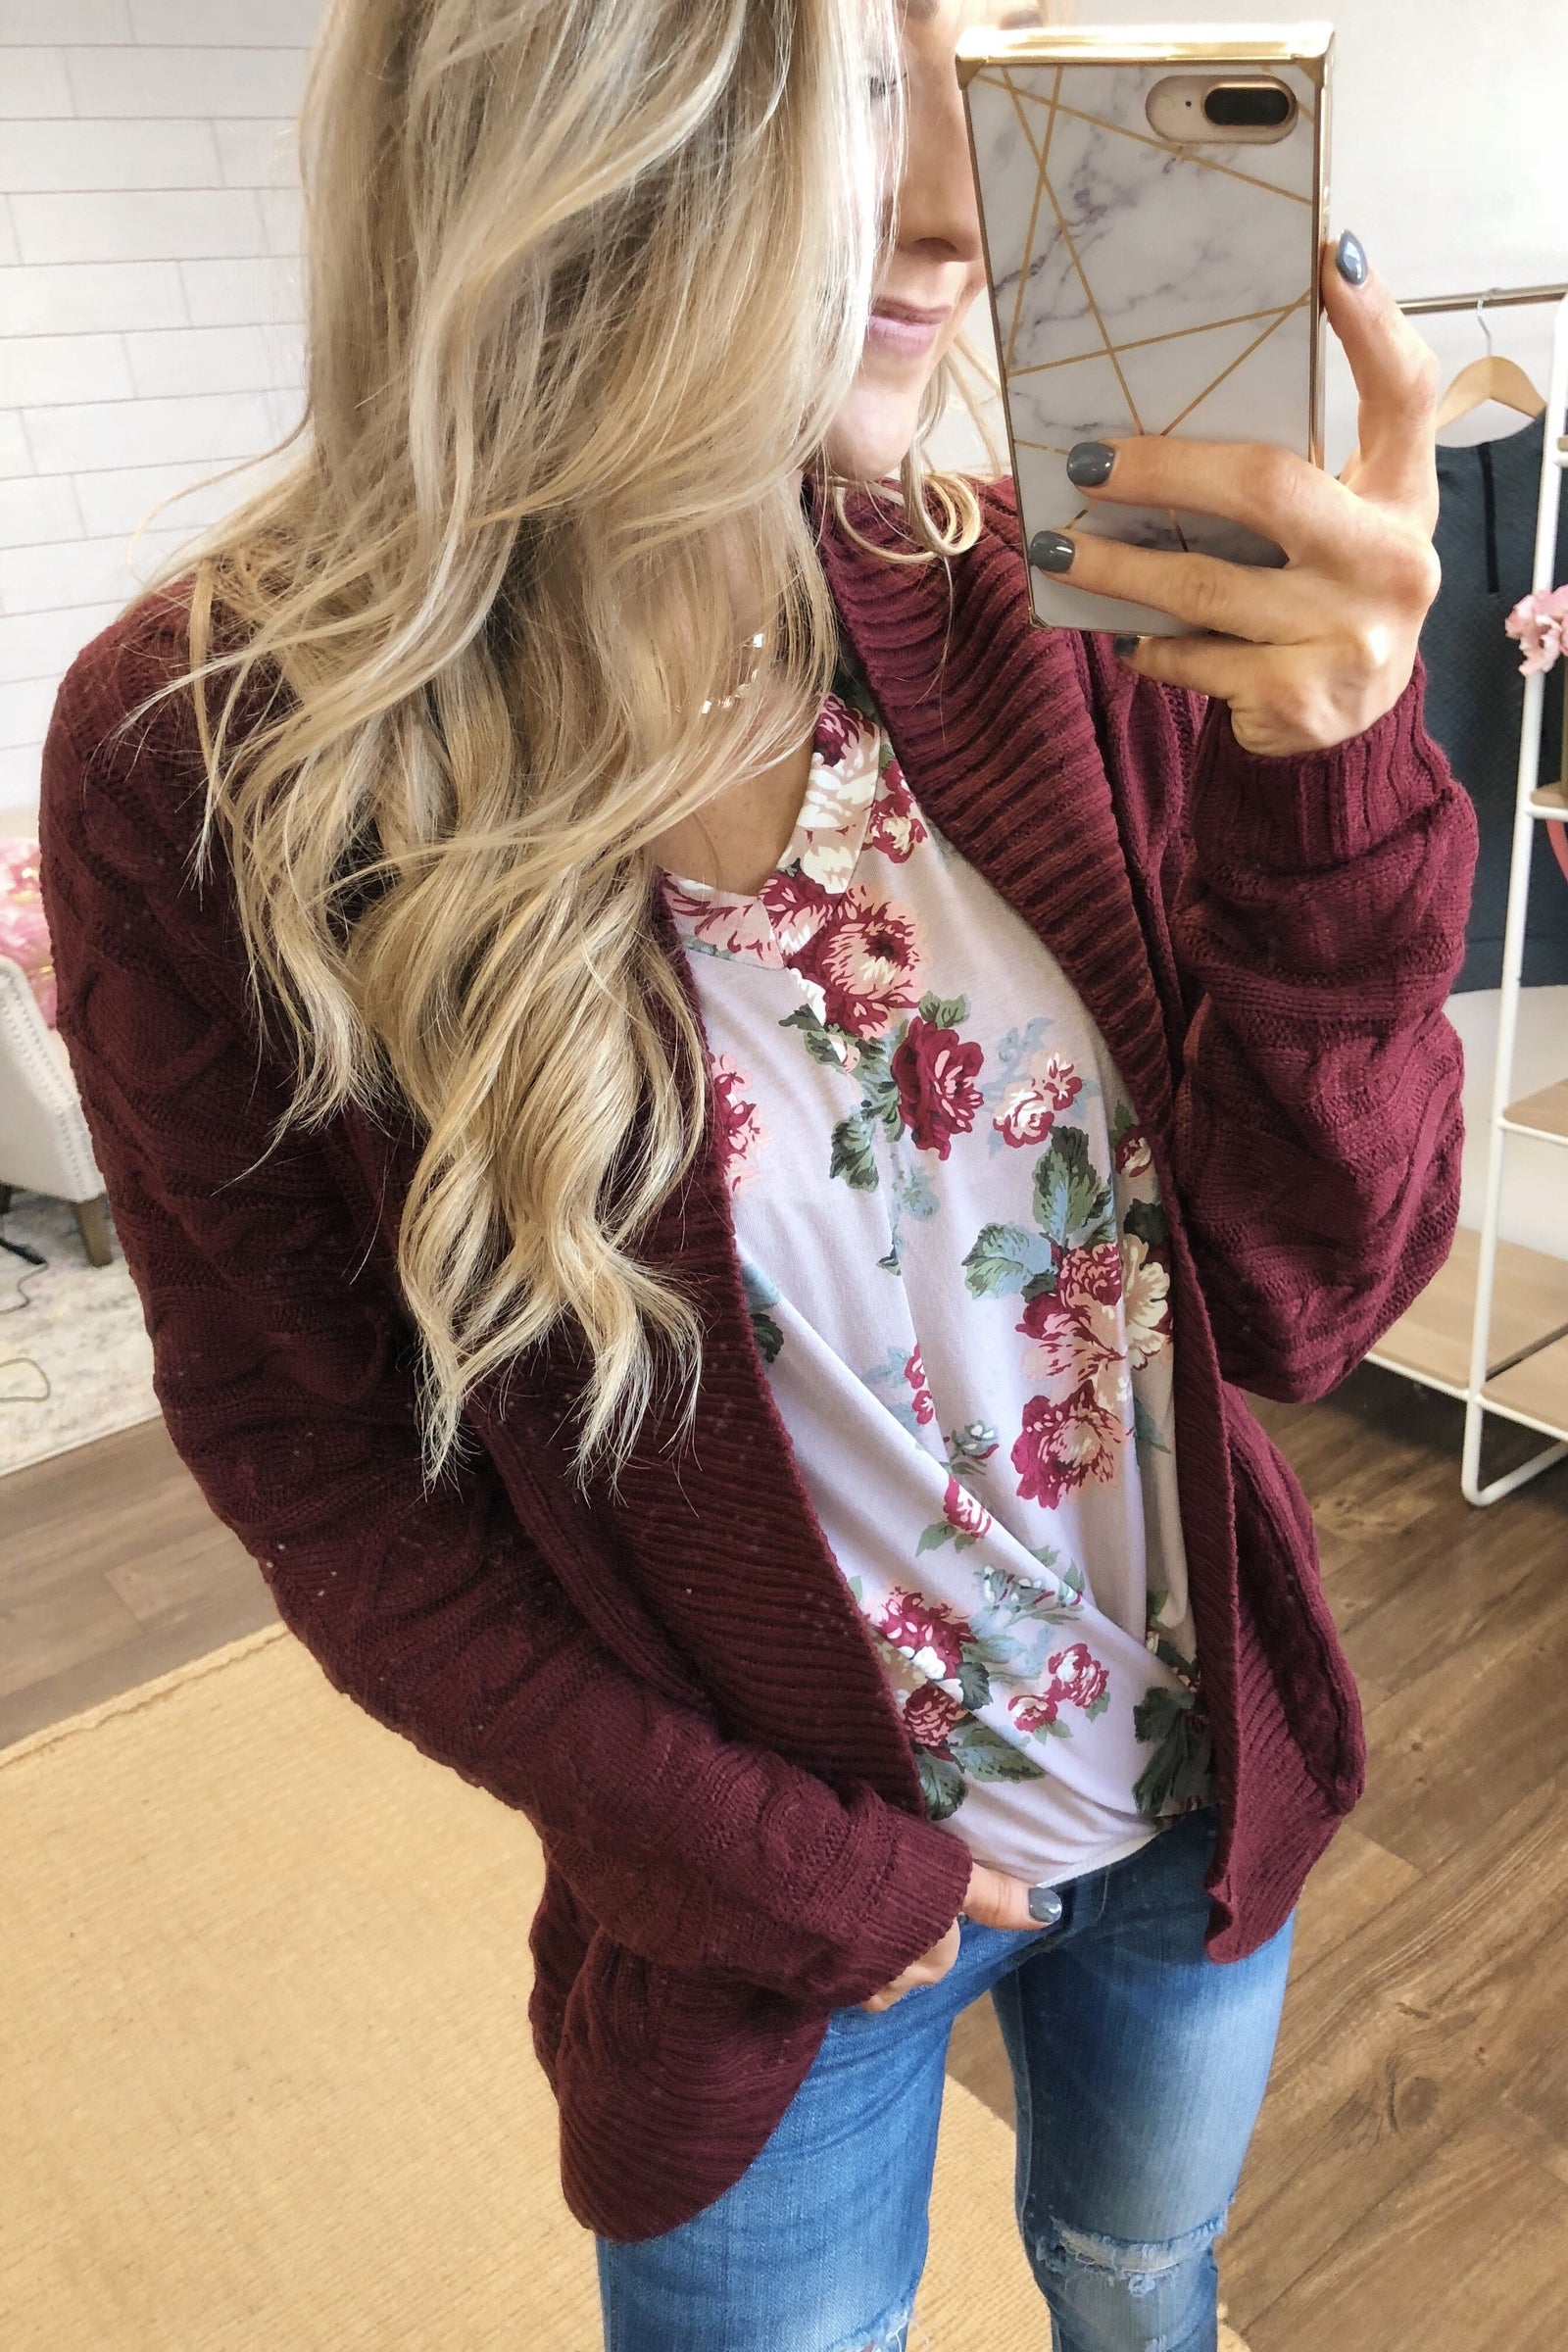 Noticing You Cable Knit Cardigan- Burgundy